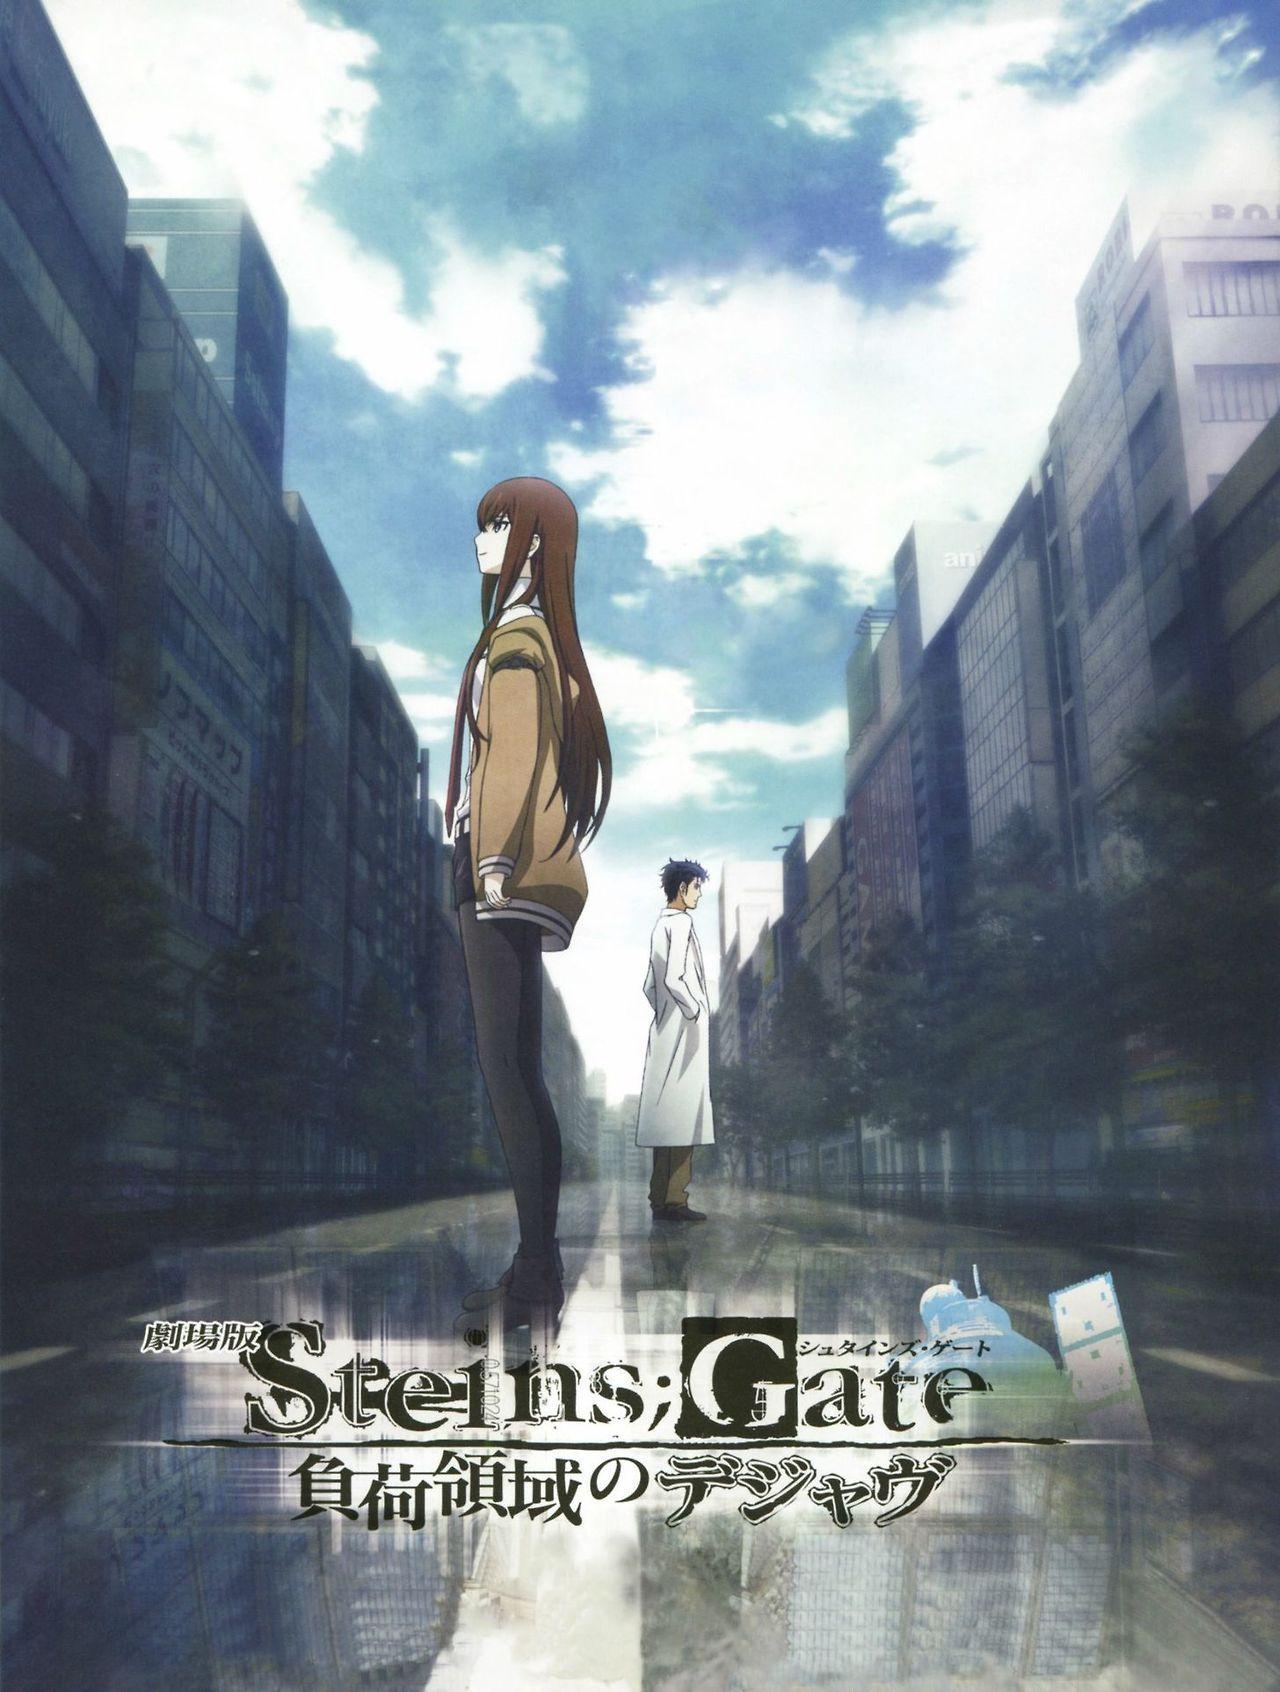 Steins Gate Phone Wallpapers